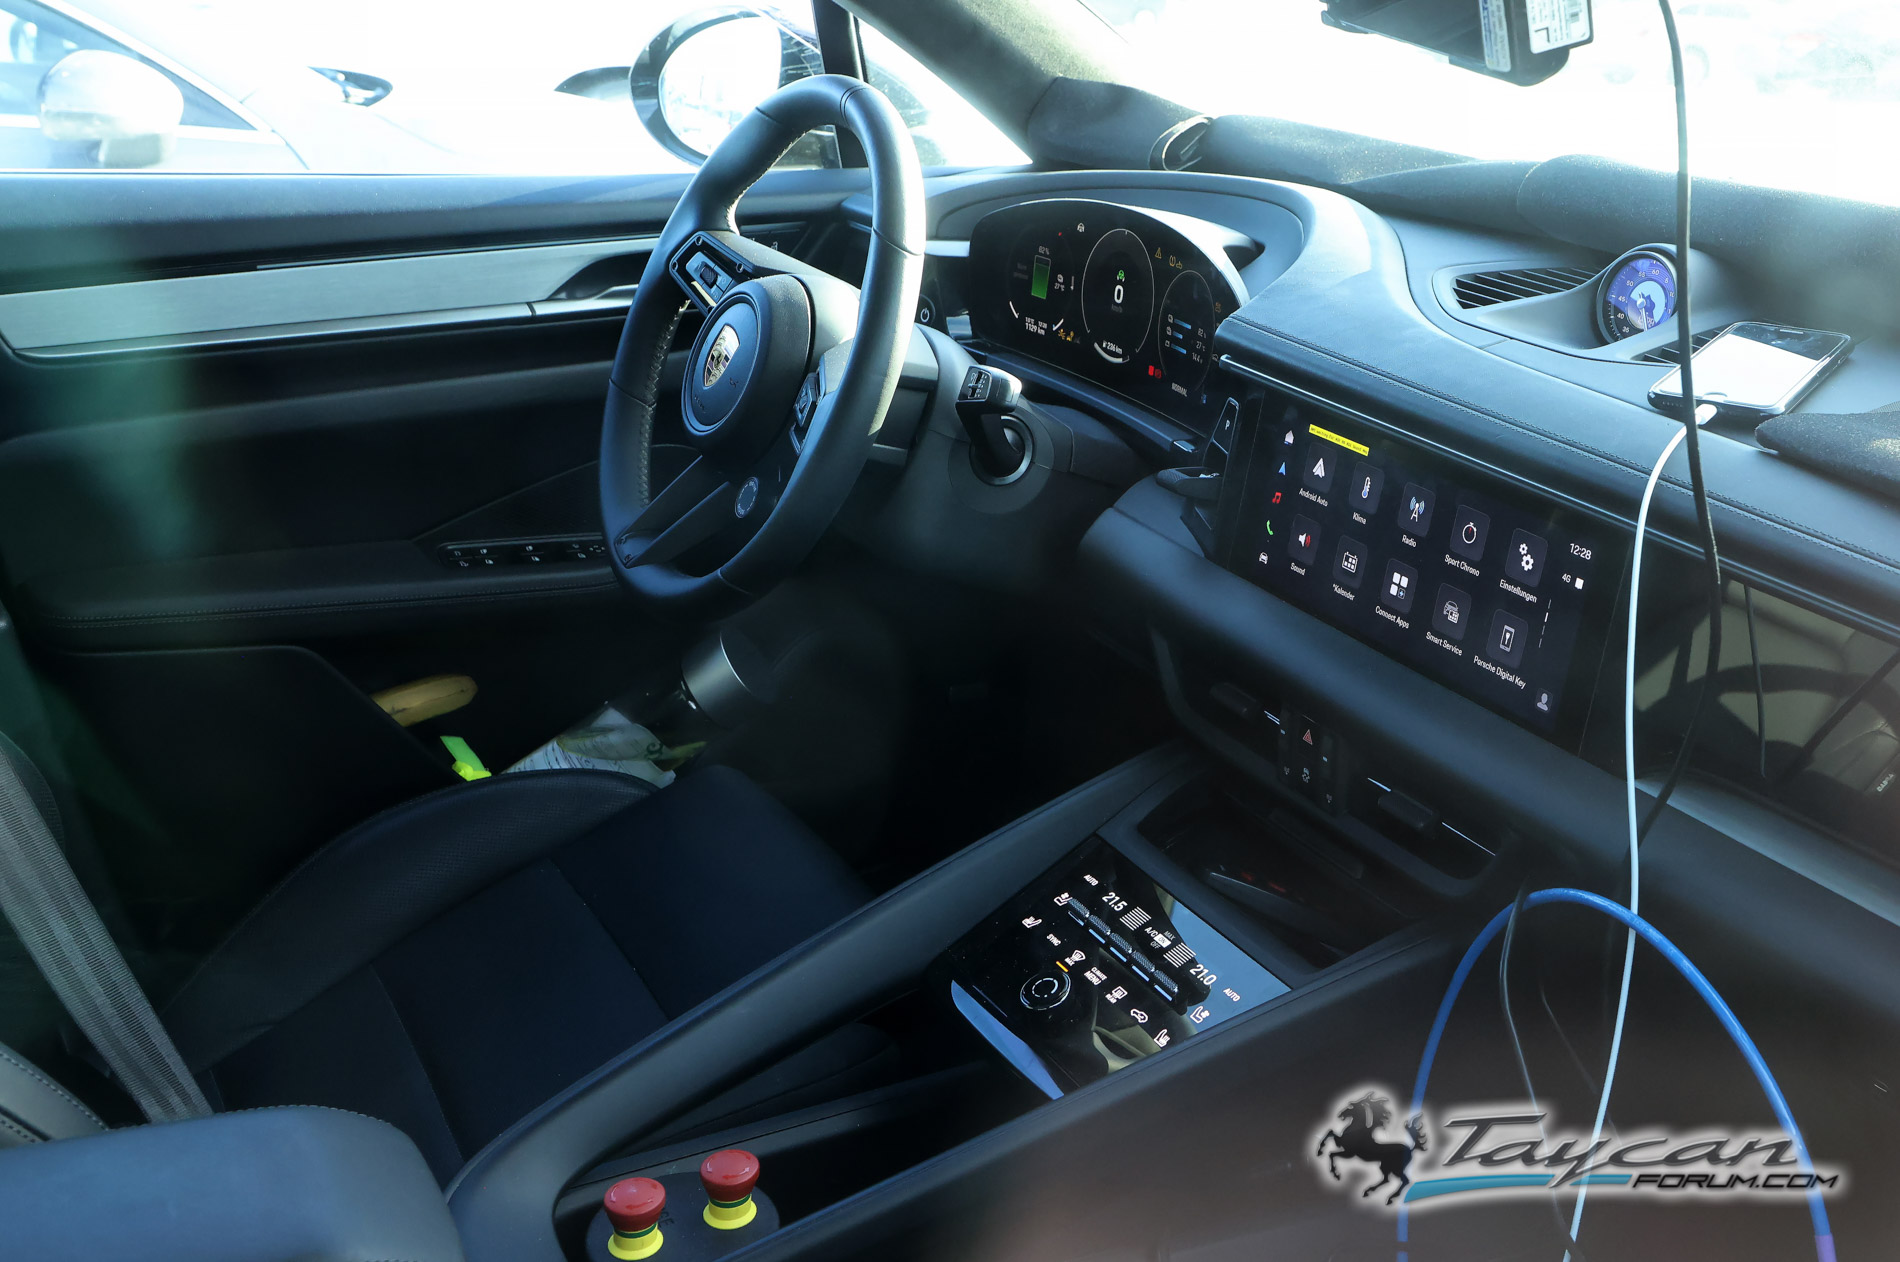 Macan EV Macan EV Interior Spied Uncovered! + Latest Cold Climate Testing Photos Porsche Macan 6